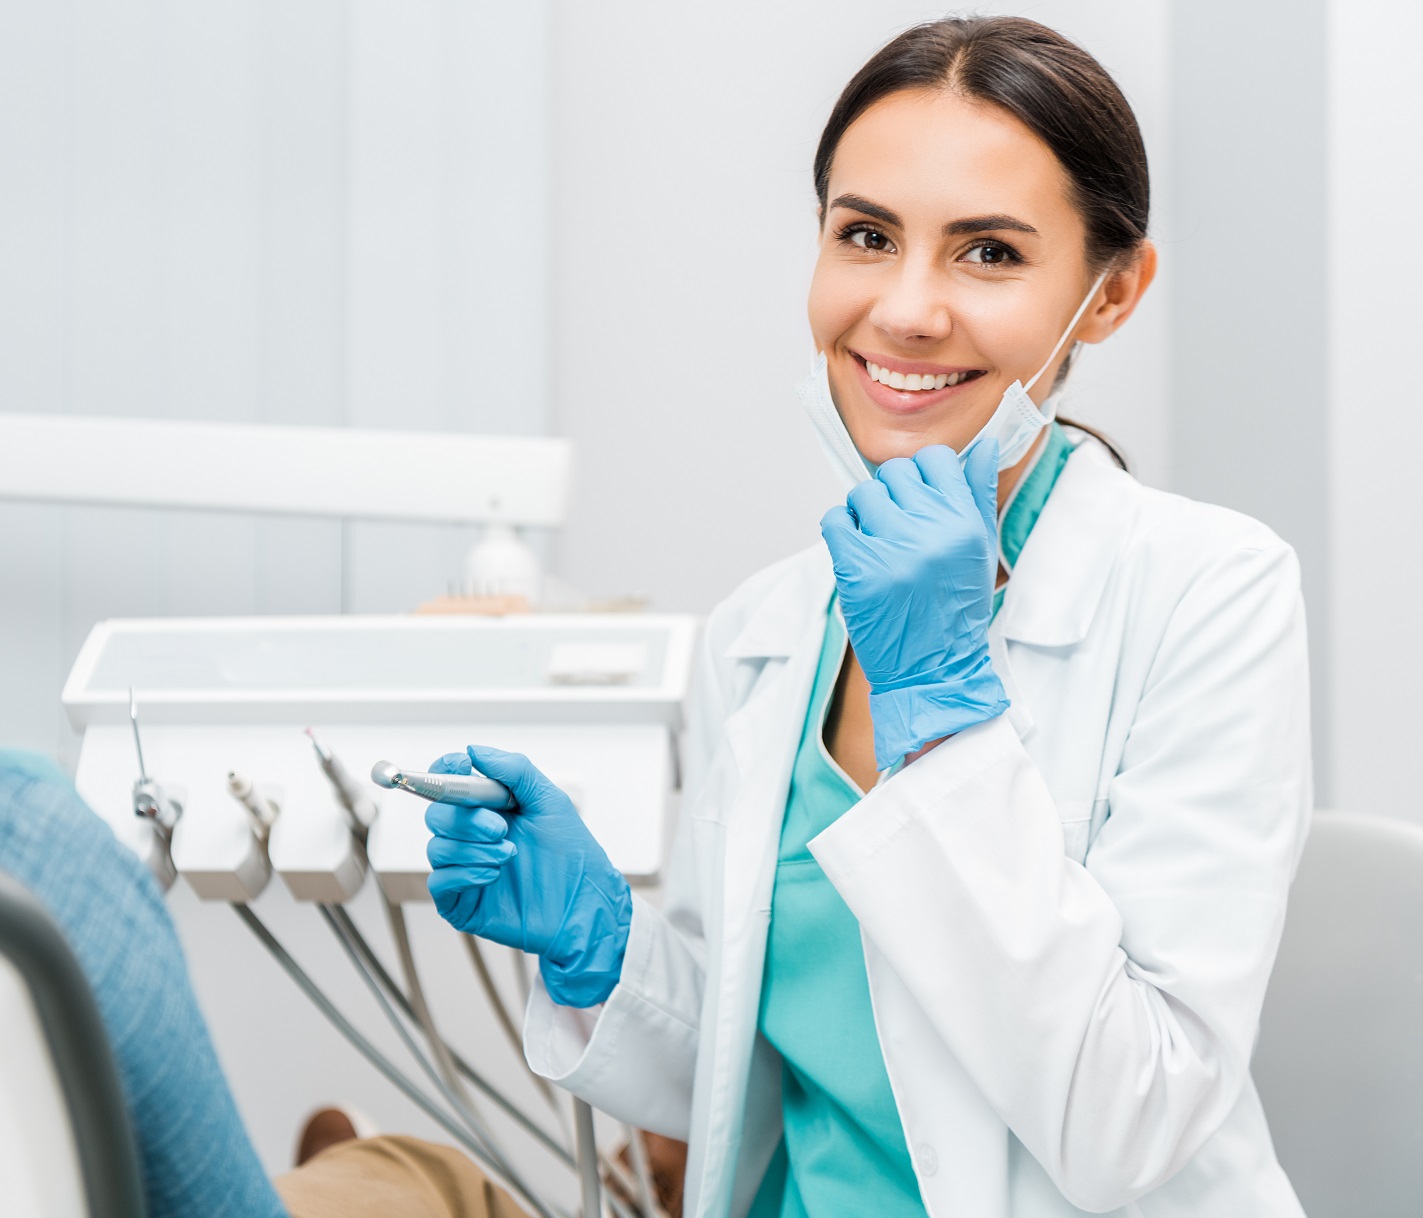 Cheerful Female Dentist Holding Drill And Smiling Near Patient